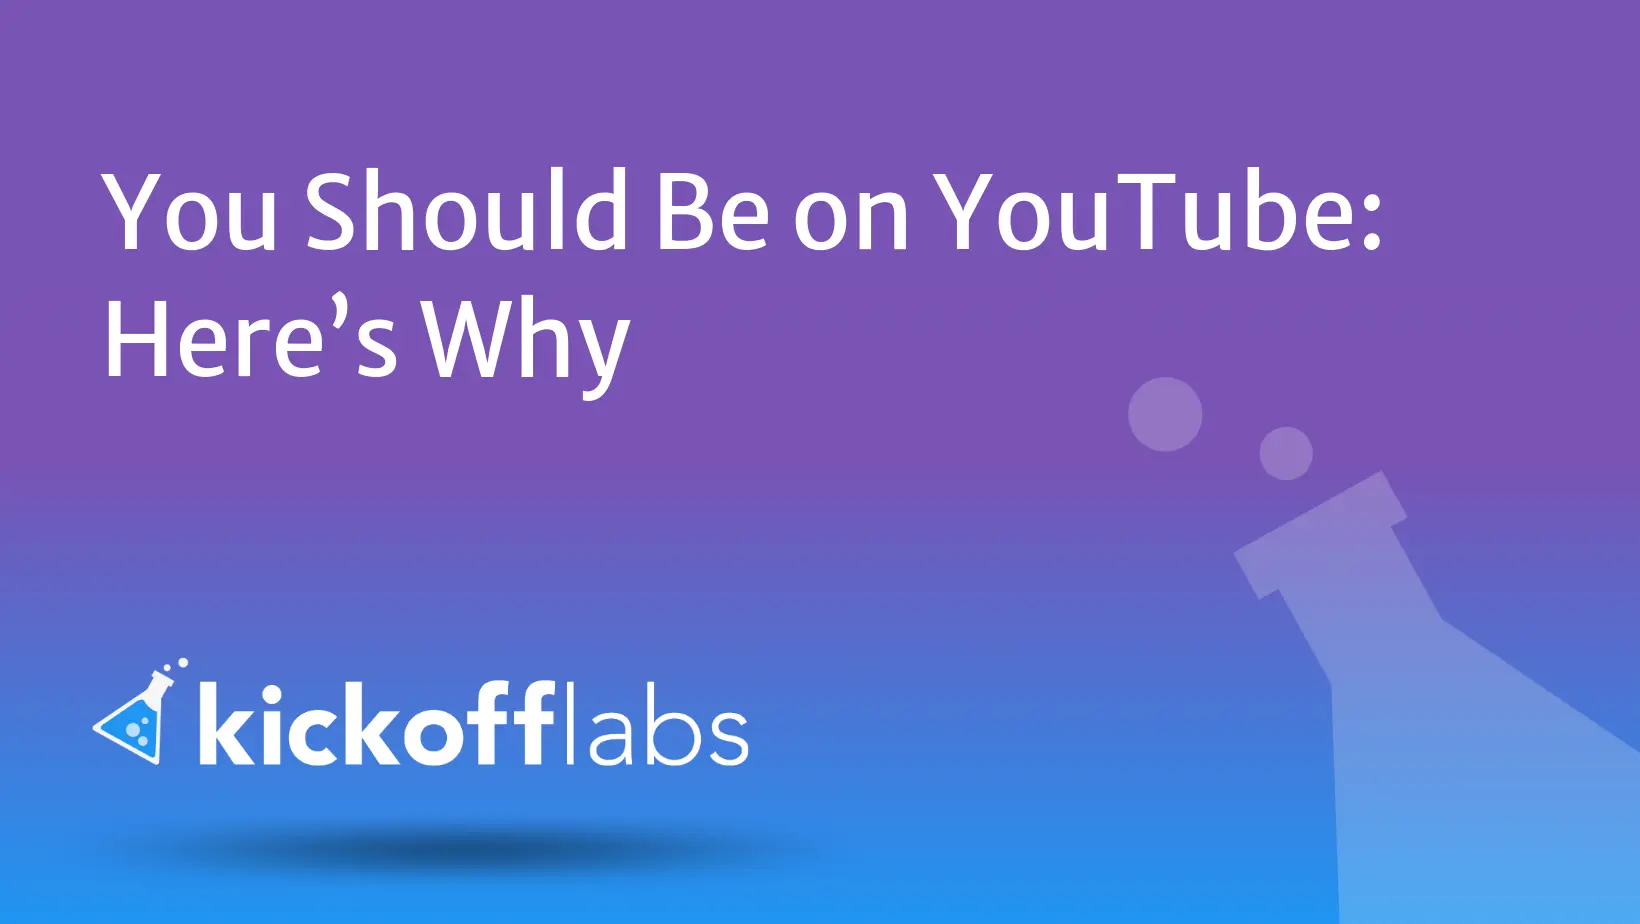 You Should Be on YouTube: Here’s Why